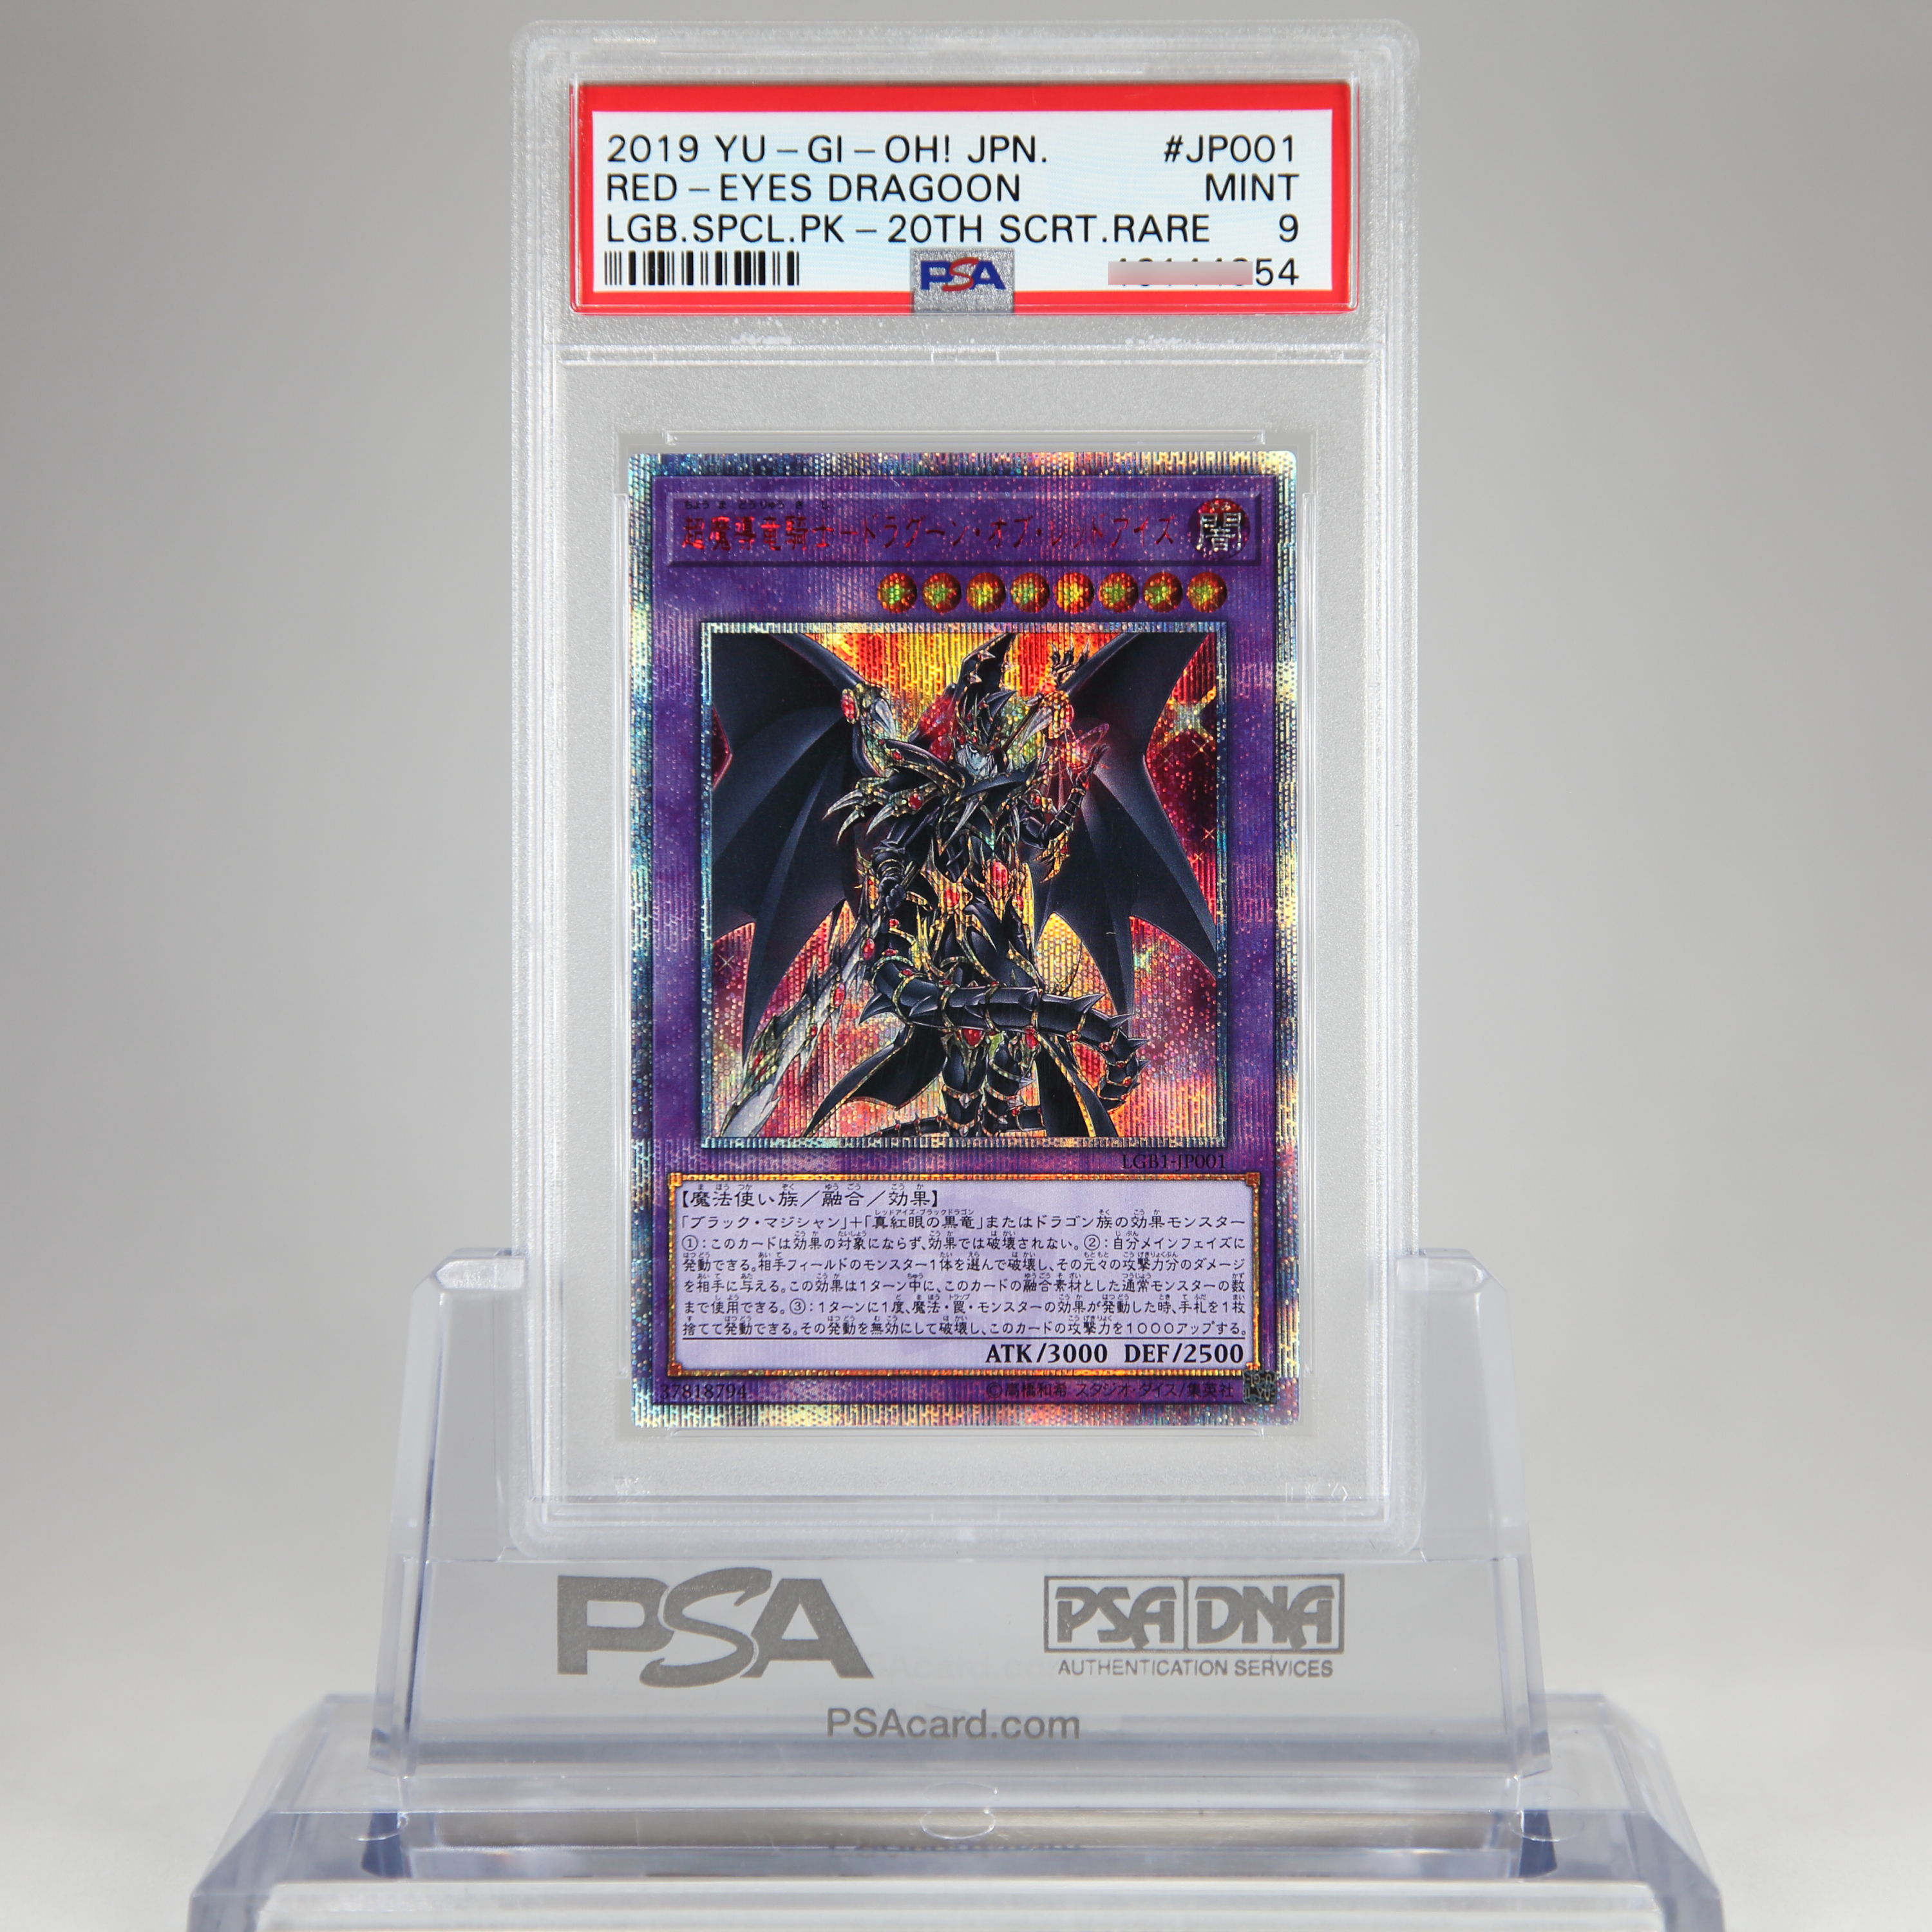 Psa9 Mint 超魔導竜騎士 ドラグーン オブ レッドアイズ The Card All For Collectors